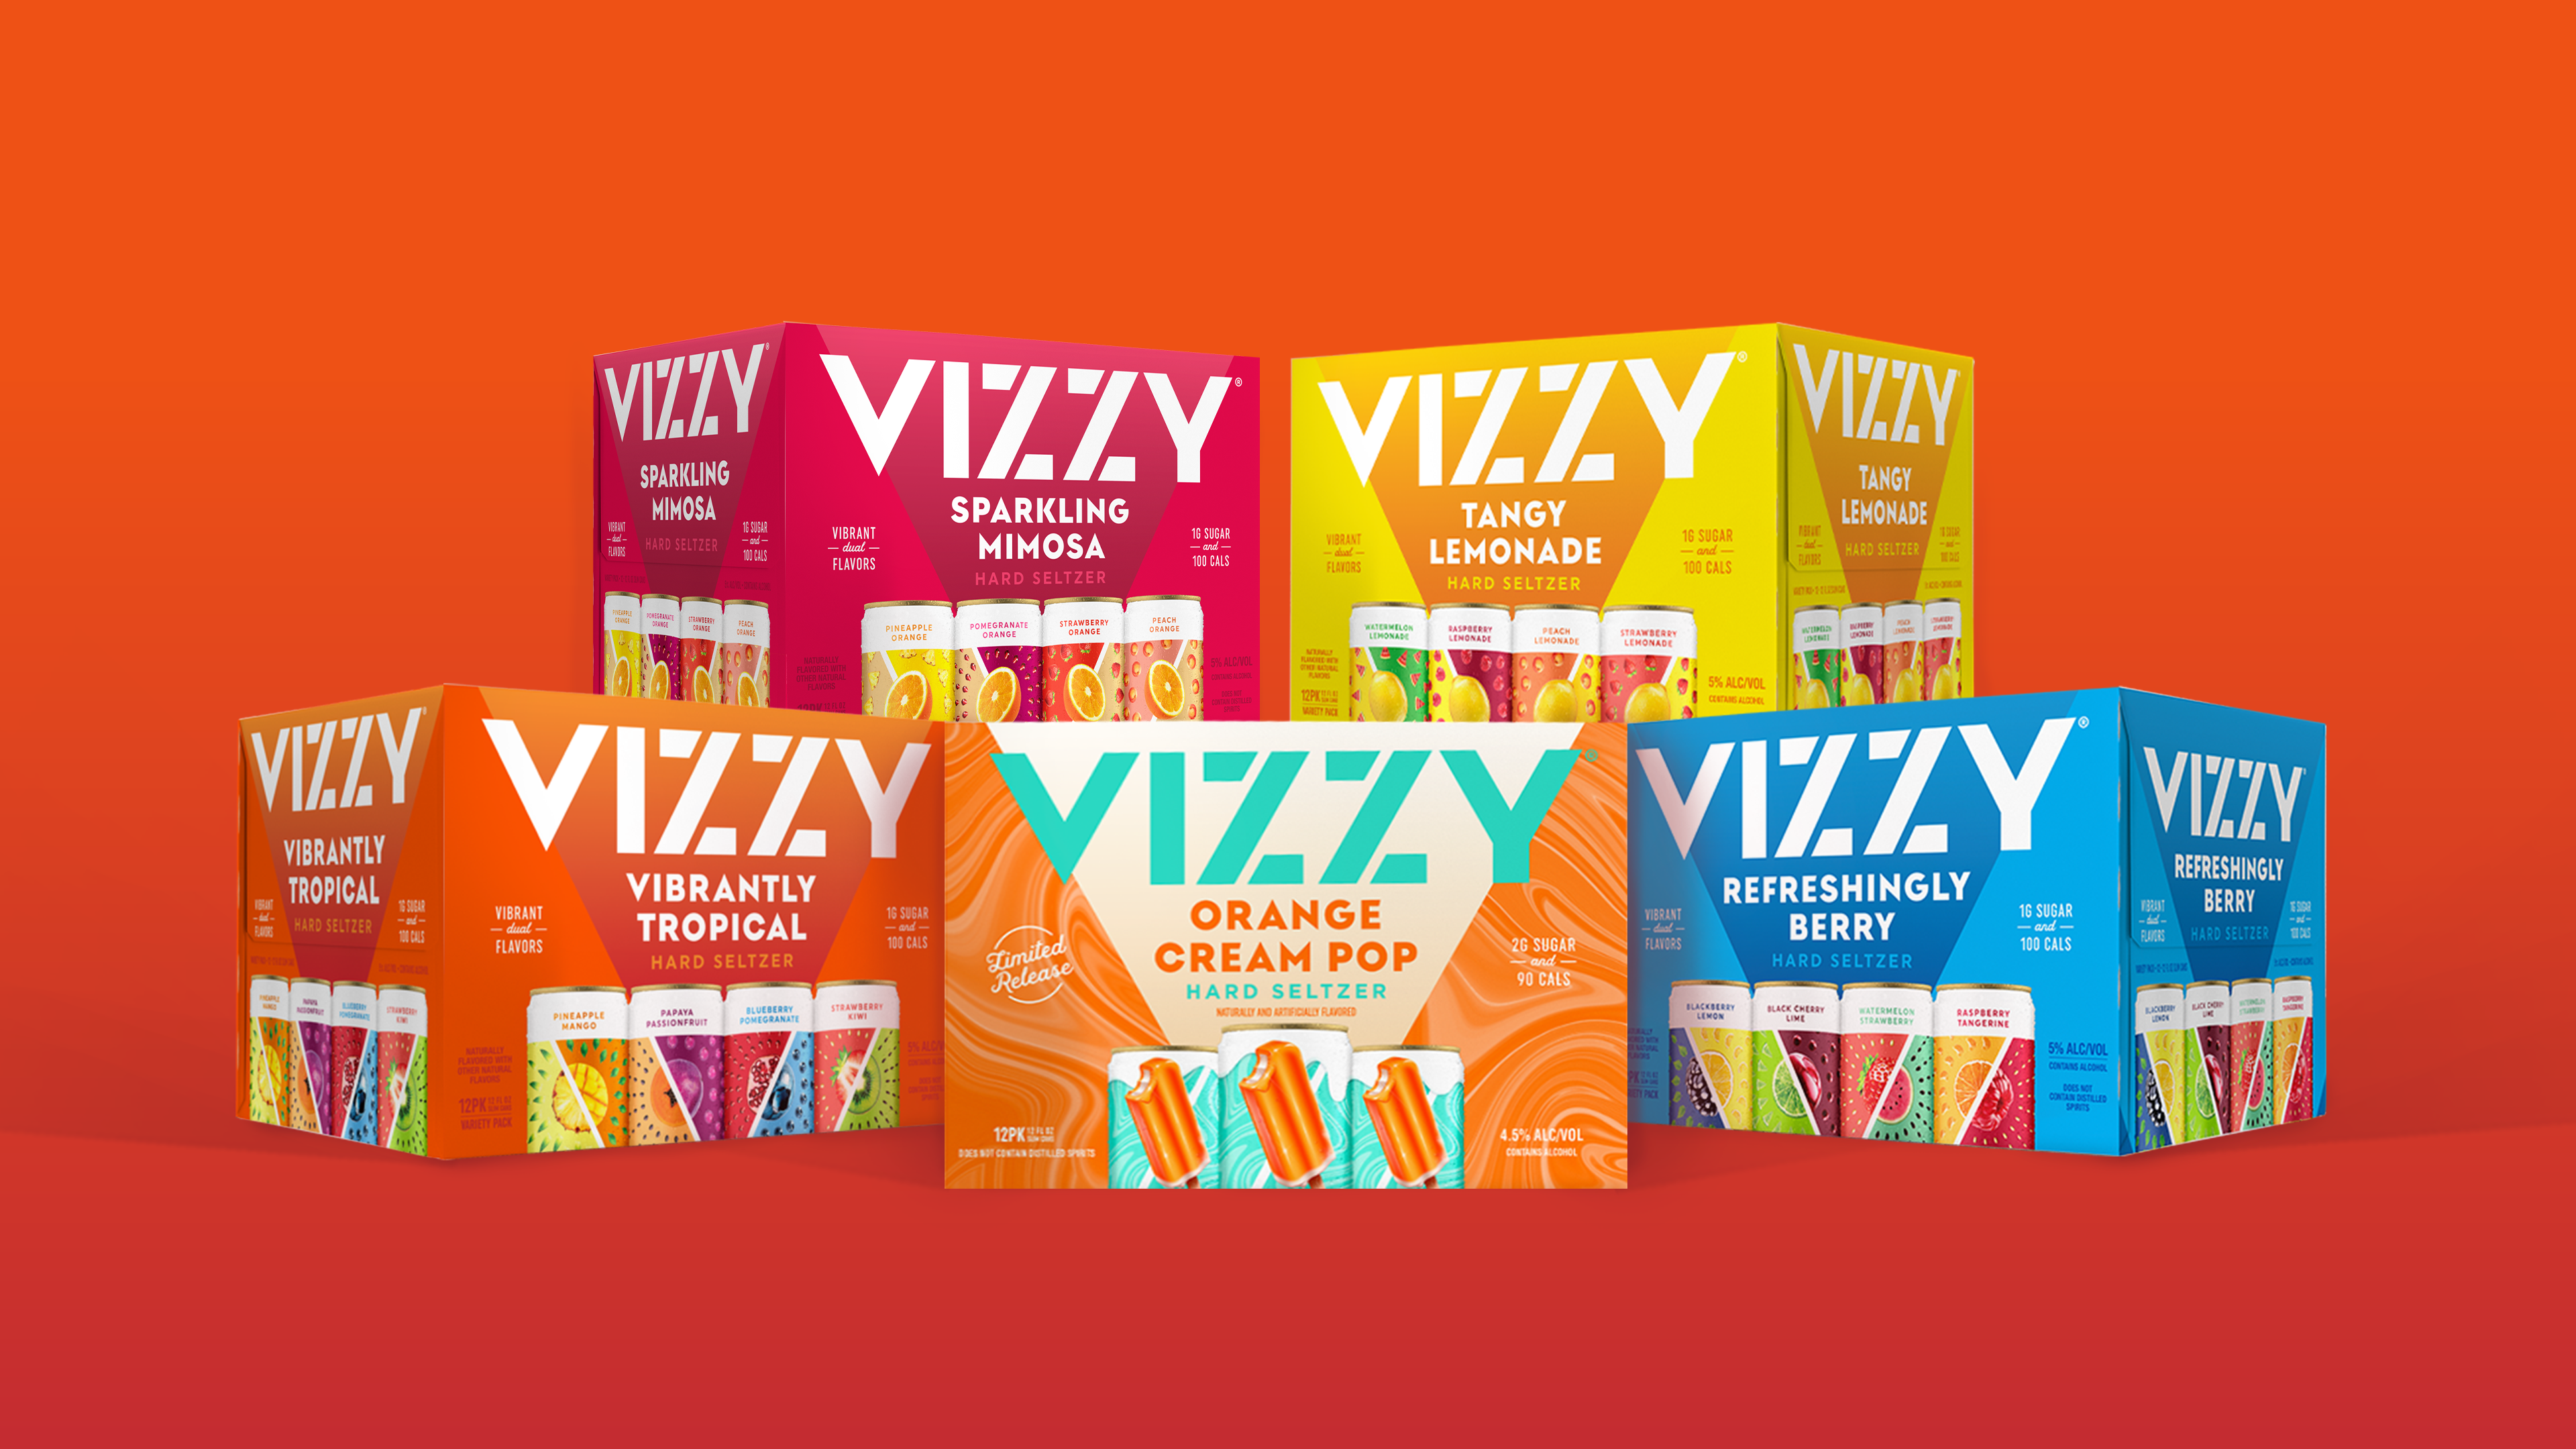 Vizzy new packaging